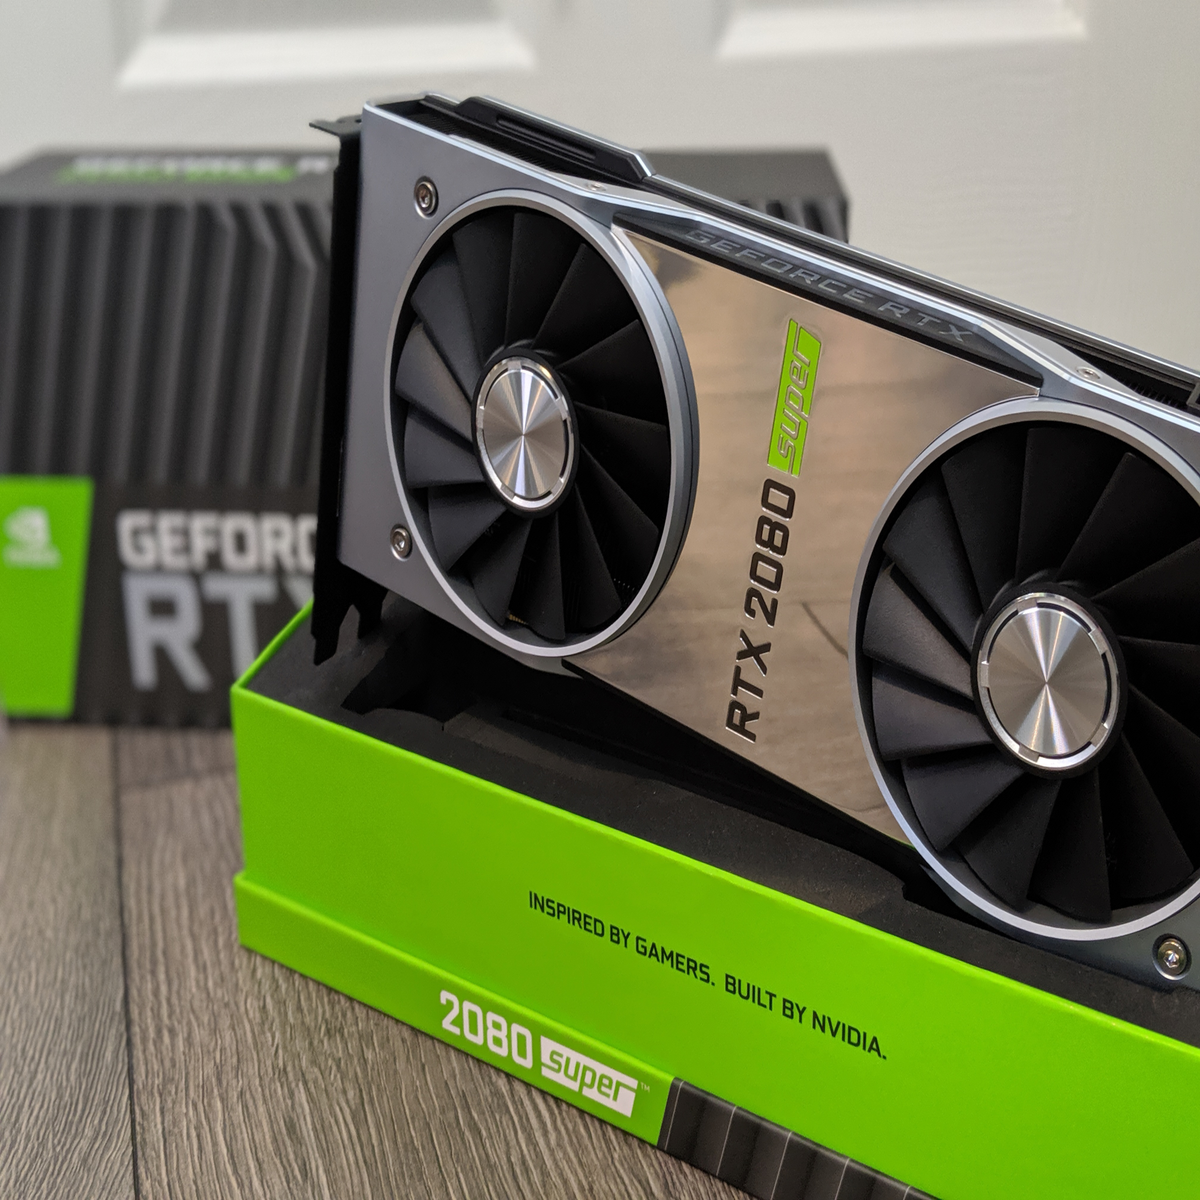 The Nvidia GeForce RTX 2080 Super is decent upgrade from its predecessor, it's not as impressive as the other Super cards | VG247